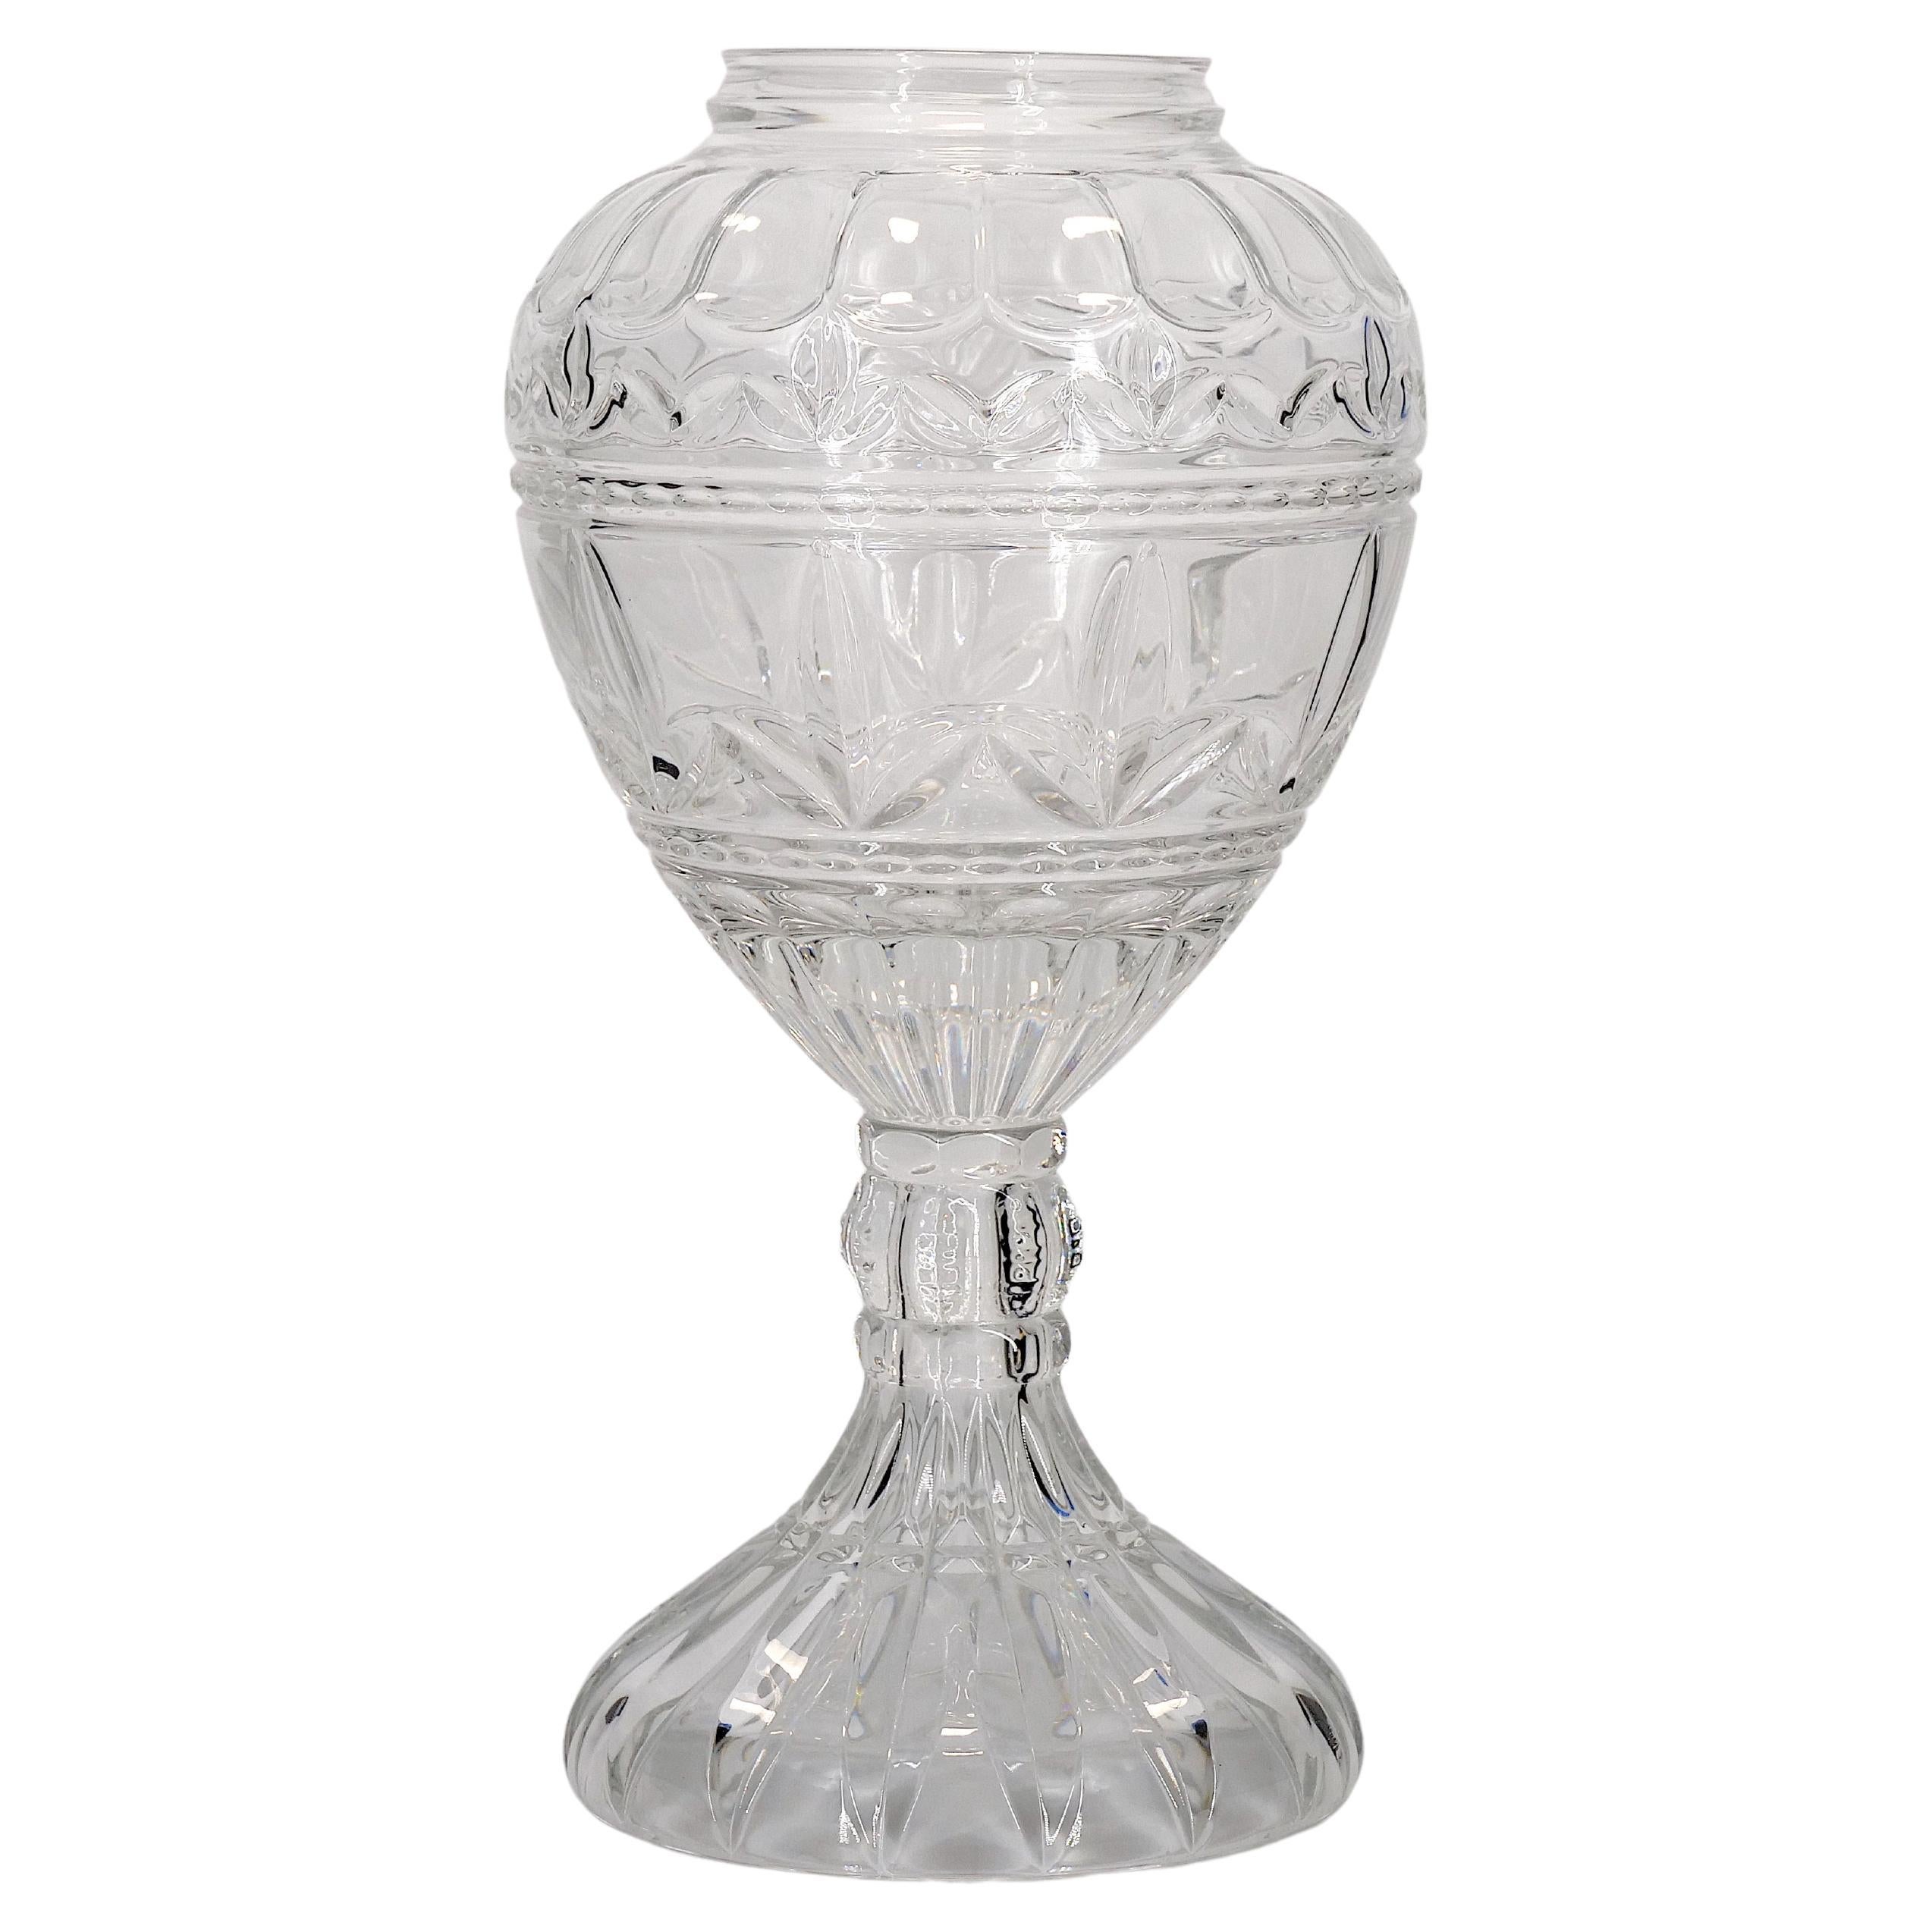 20th Century French Cut Crystal Tall Covered Decorative Piece / Urn For Sale